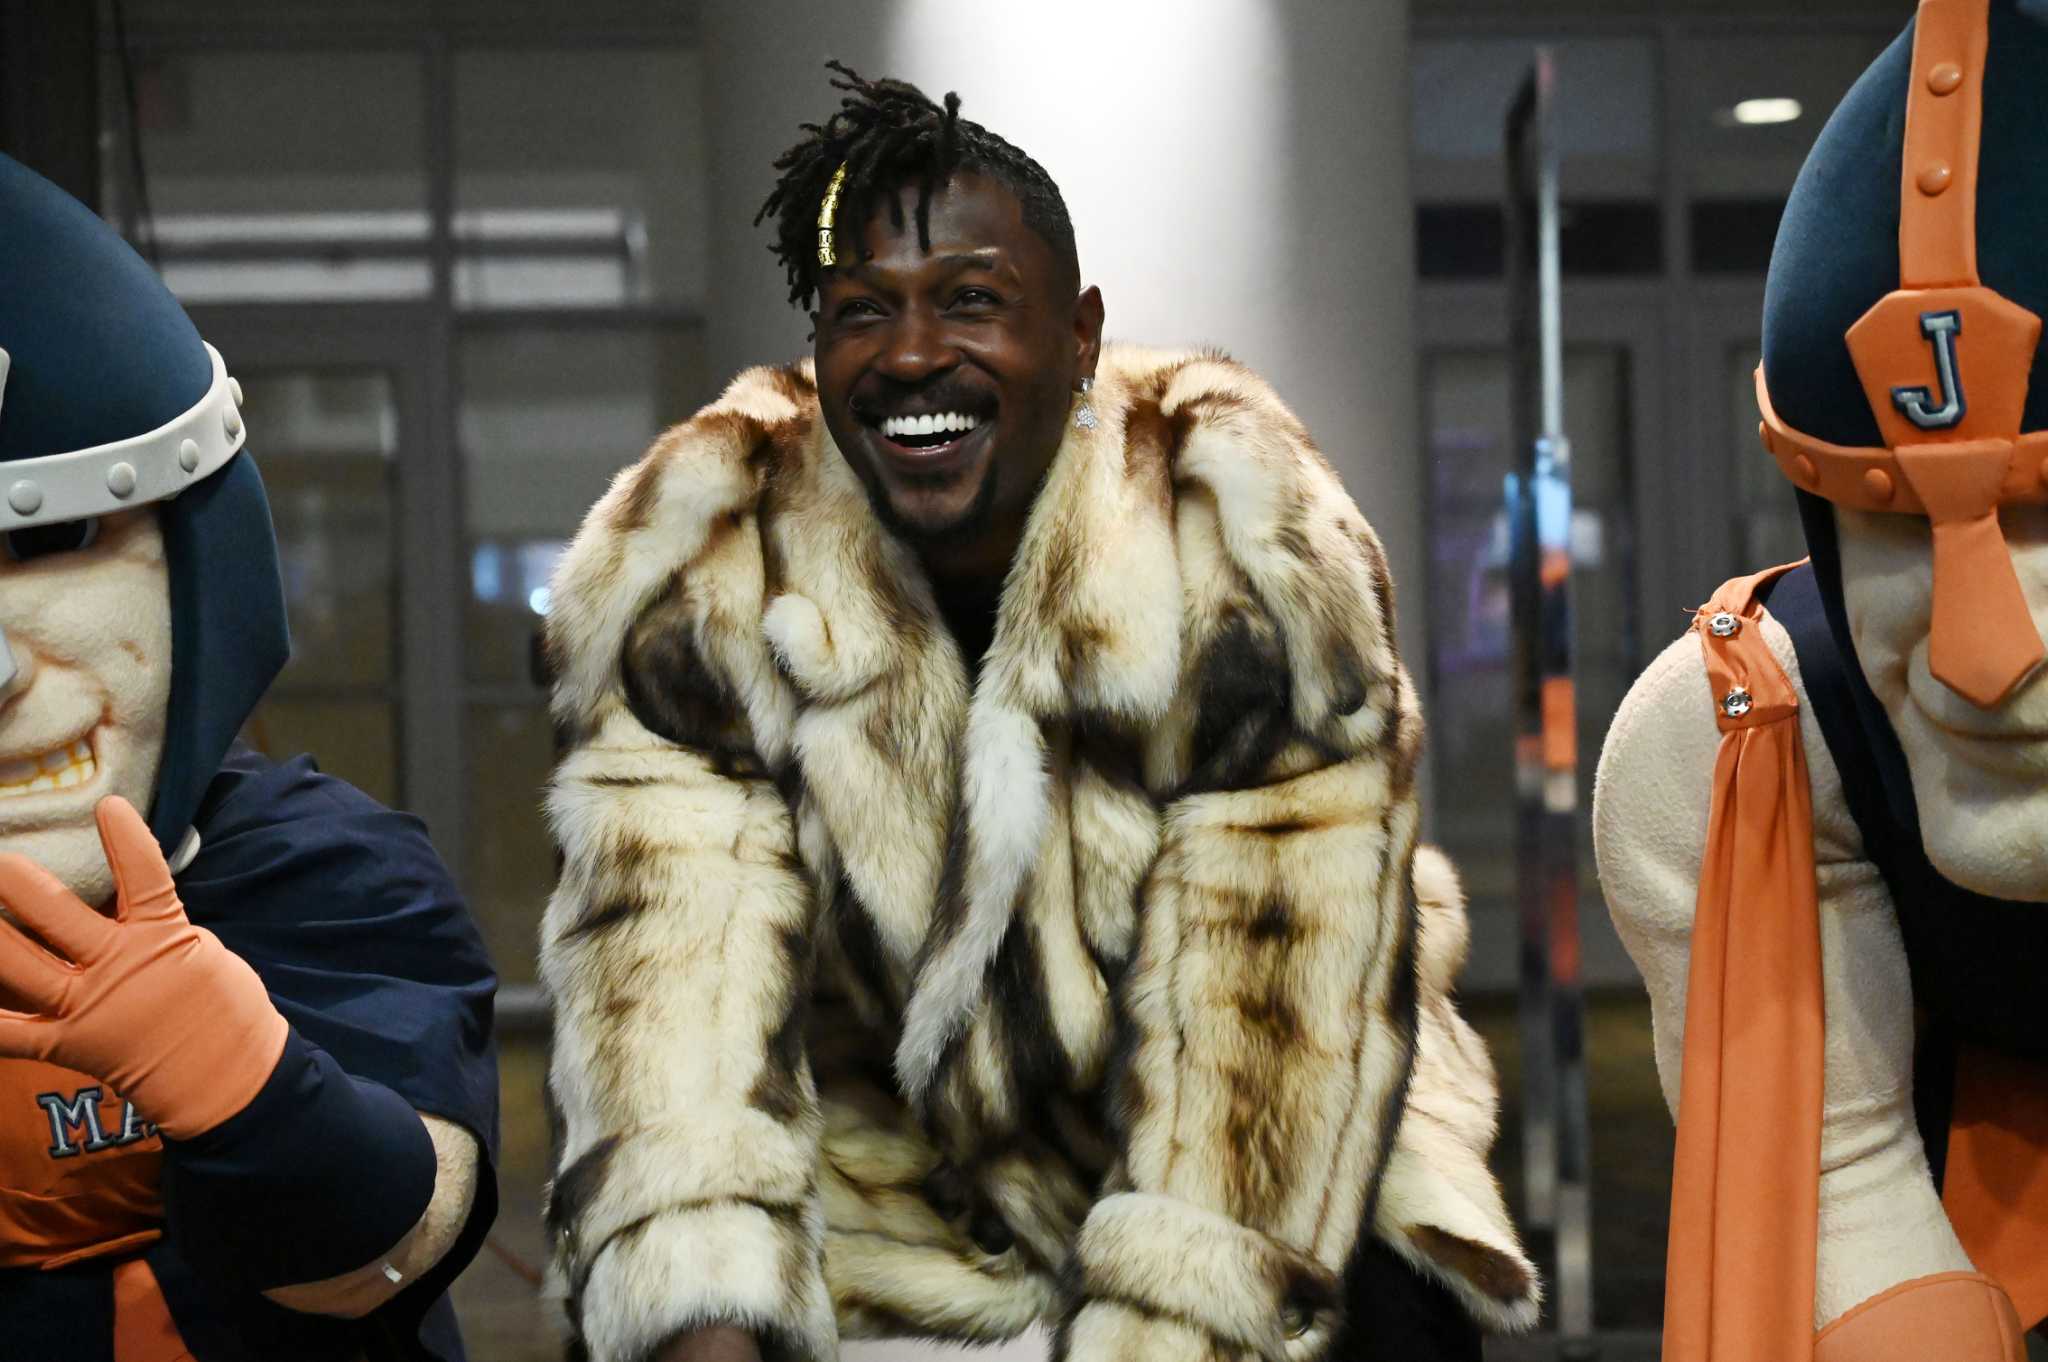 Antonio Brown Claims His Snapchat Was Hacked After Posting Graphic